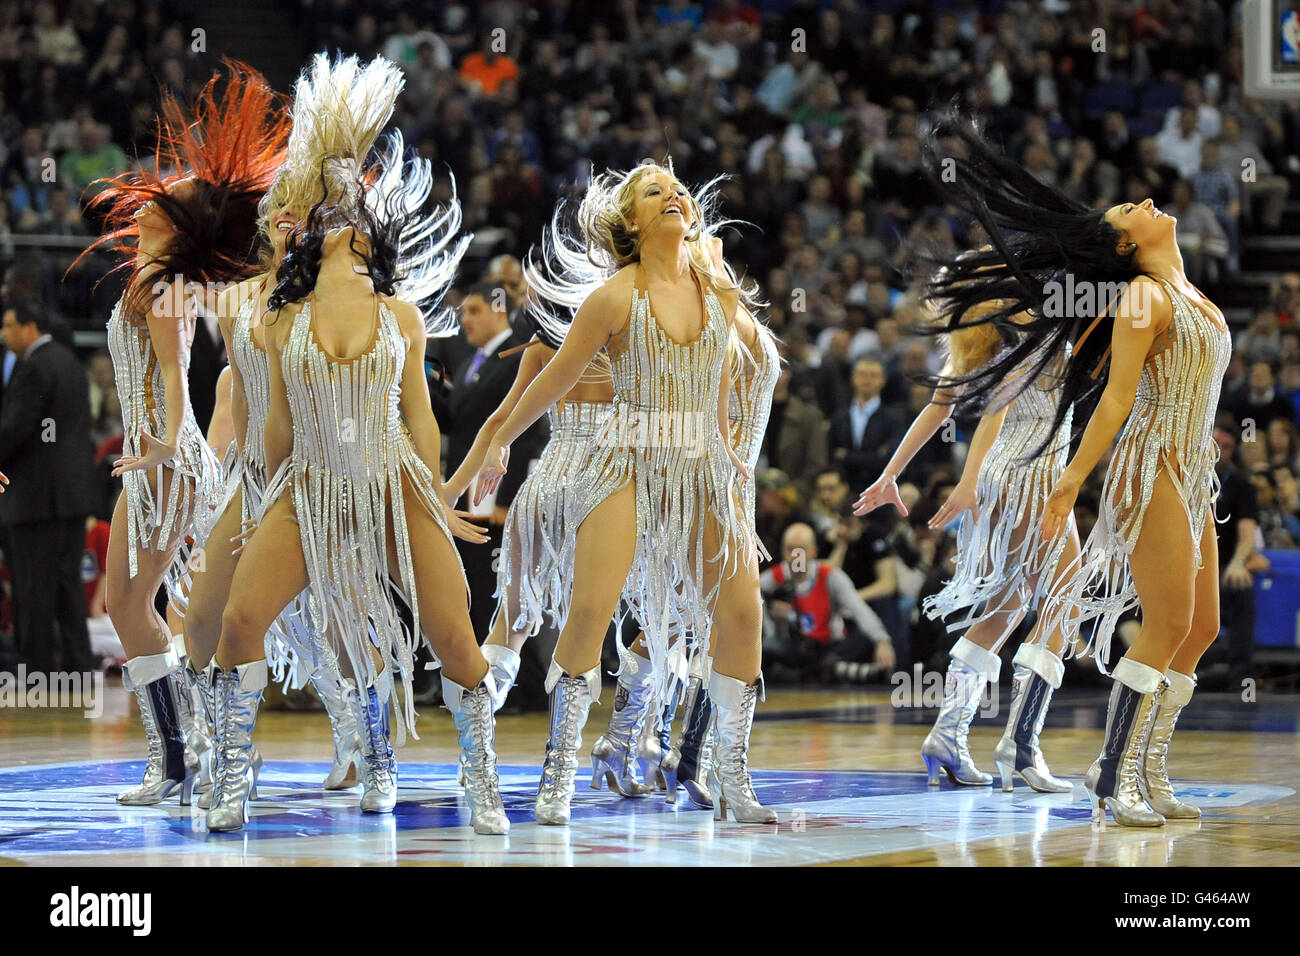 Basketball - NBA - Game One - New Jersey Nets v Toronto Raptors - o2 Arena. Cheerleaders perform for the fans Stock Photo